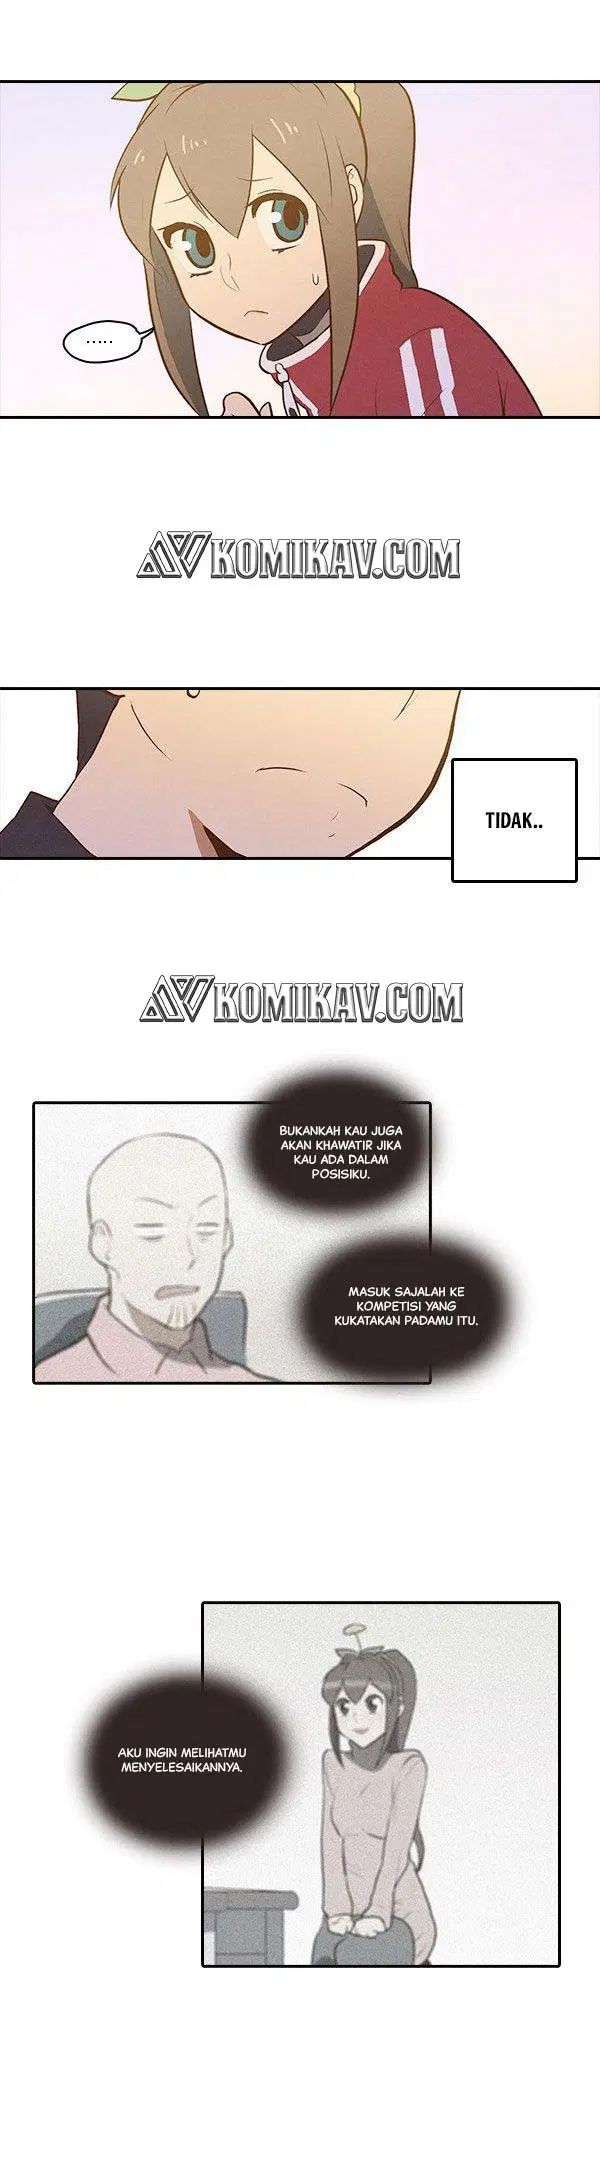 How To Open A Triangular Riceball Chapter 35